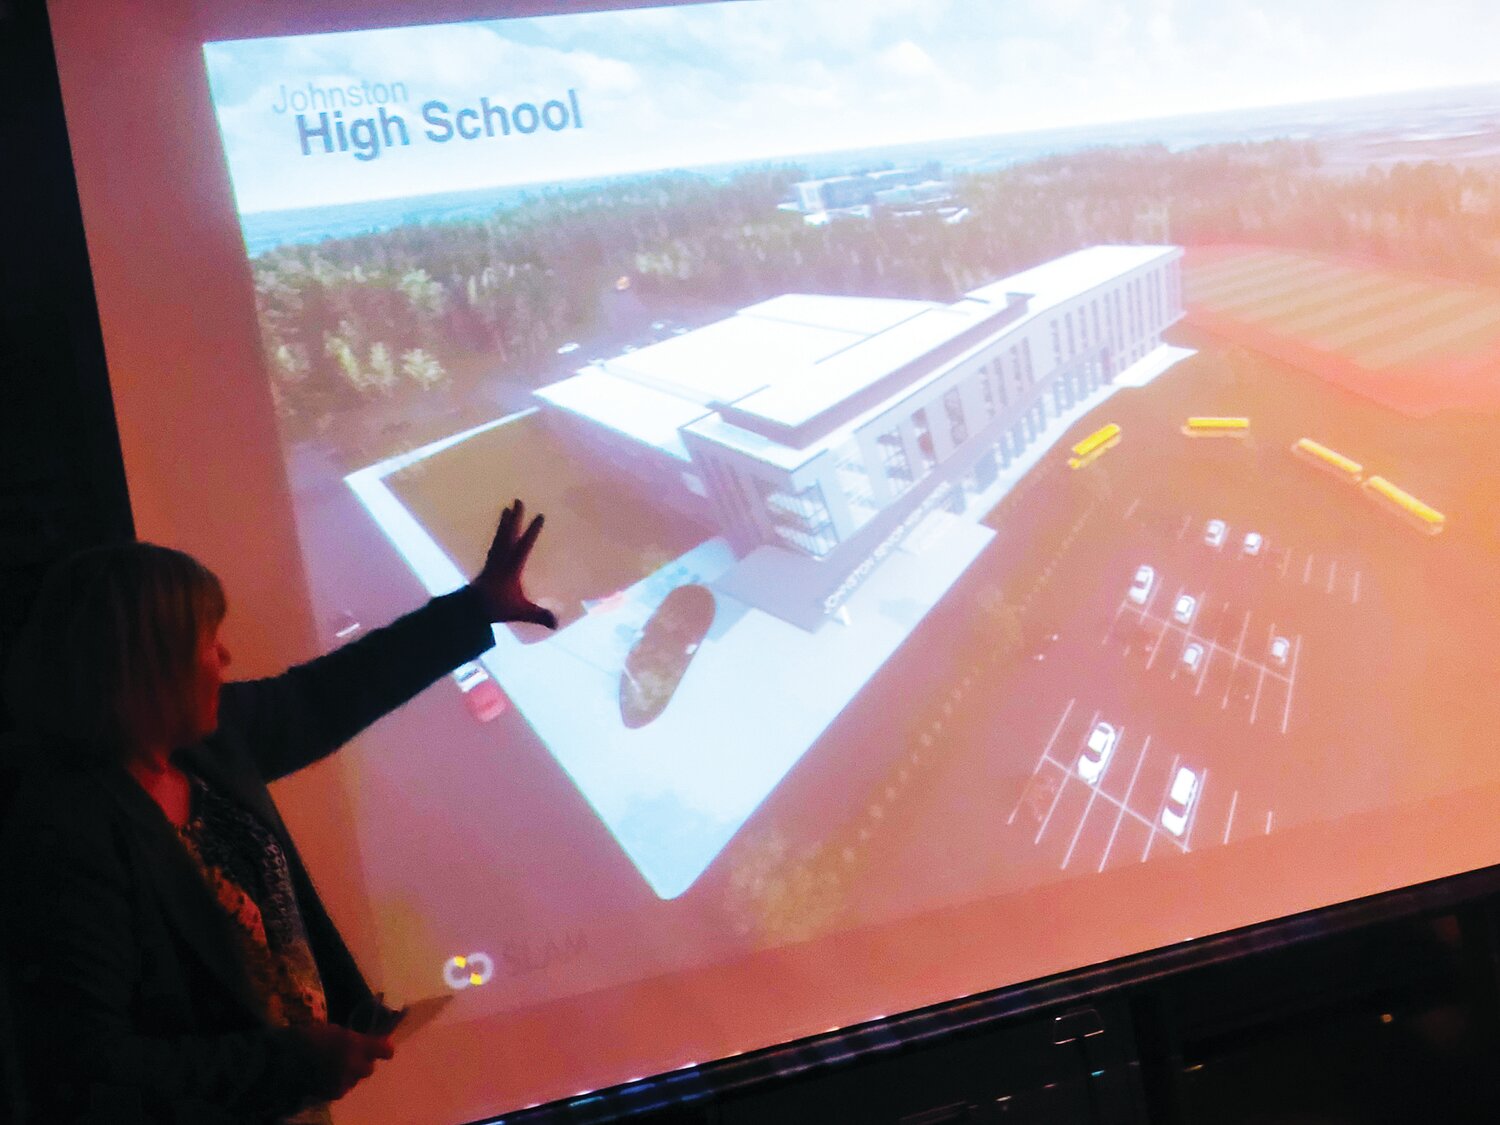 NEW JHS: Cathie Ellithorpe, Principal of the SLAM Collaborative, unveils the earliest rendering of a planned new Johnston High School.